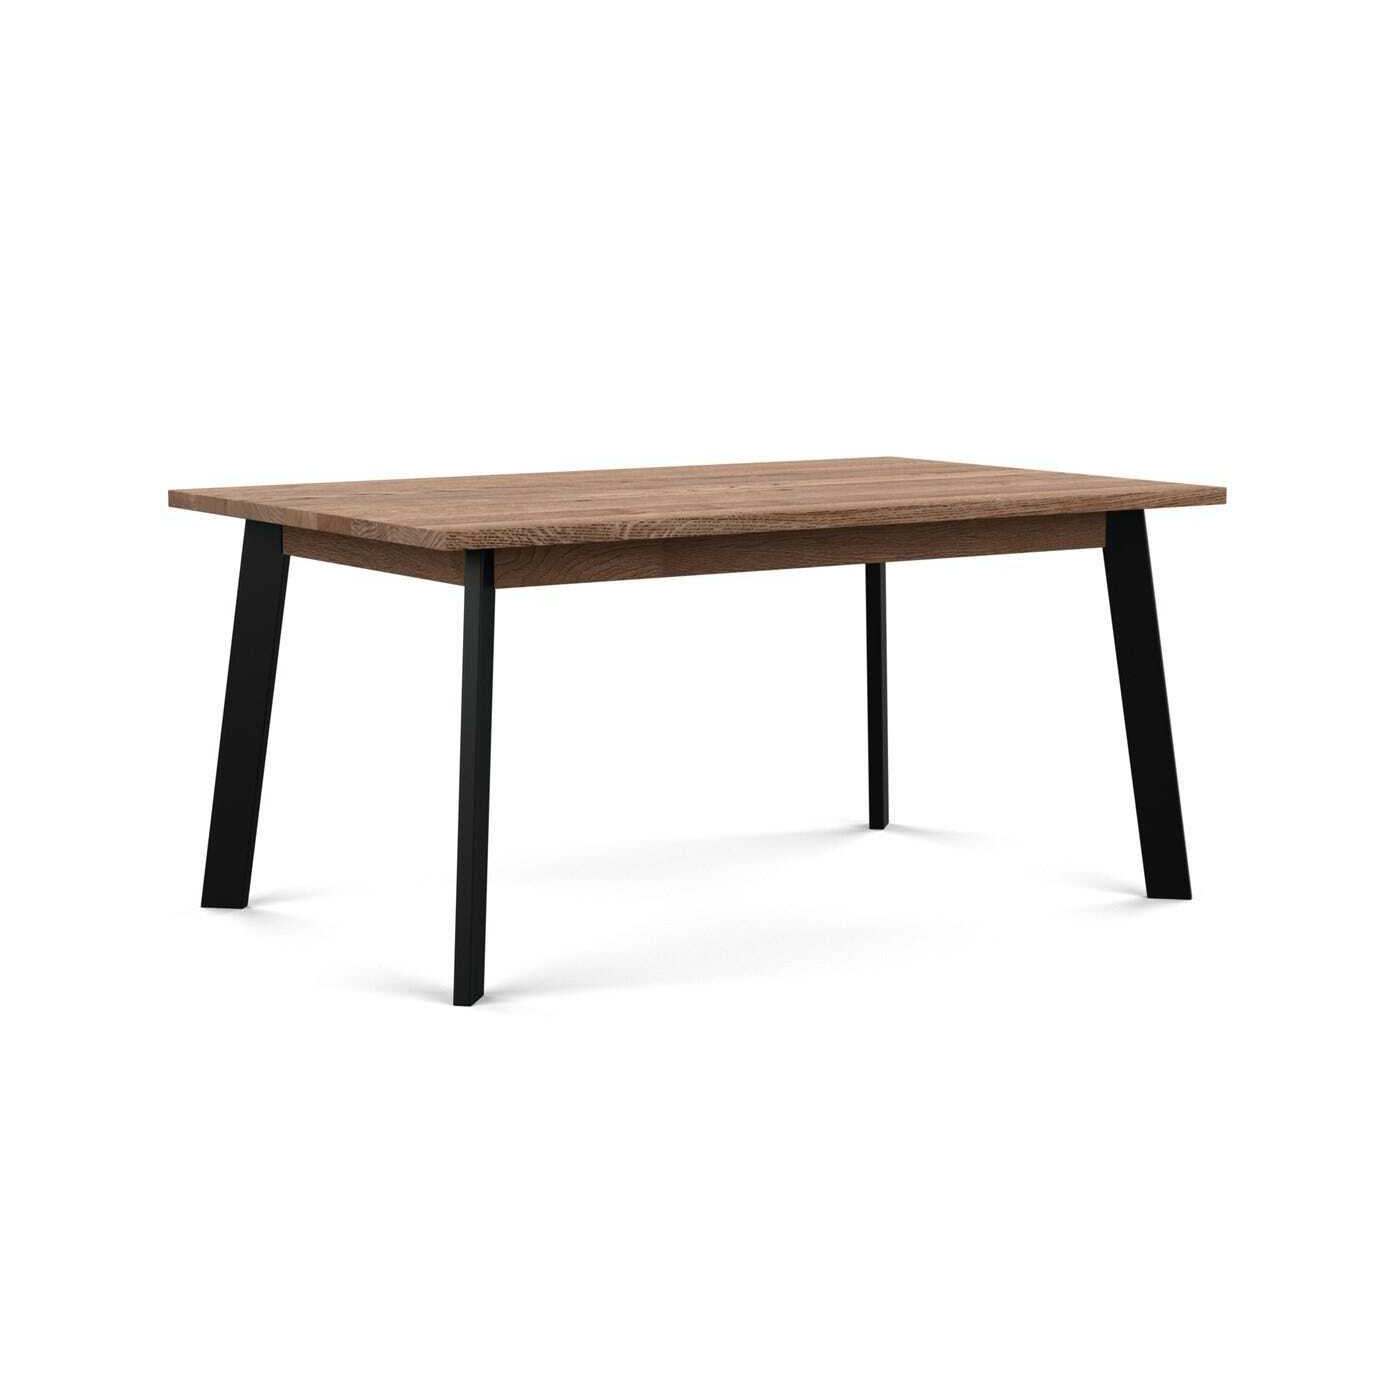 Heal's Nova Extending Dining Table Smoked Oiled Oak L160 + 50cm x2 - image 1